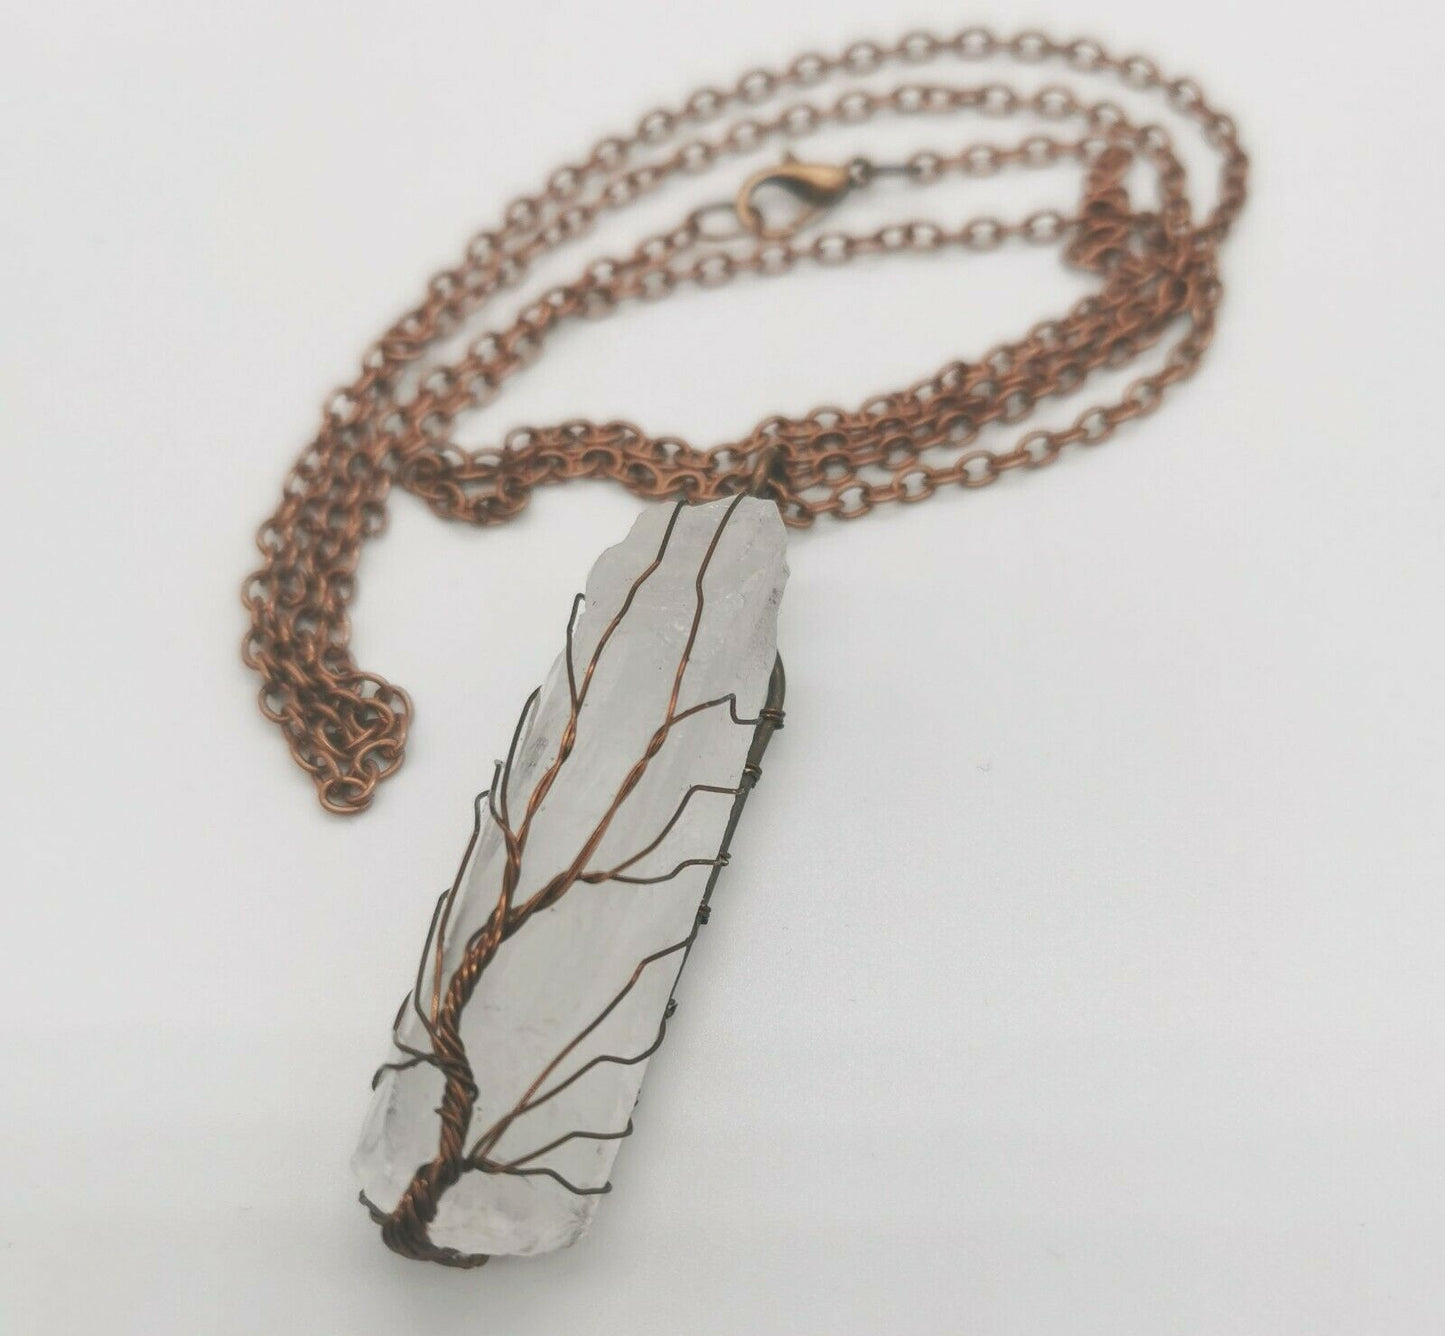 Raw Quartz Healing Crystal Point Tree Of Life Antique Copper Wire Wrapped Necklace 30"